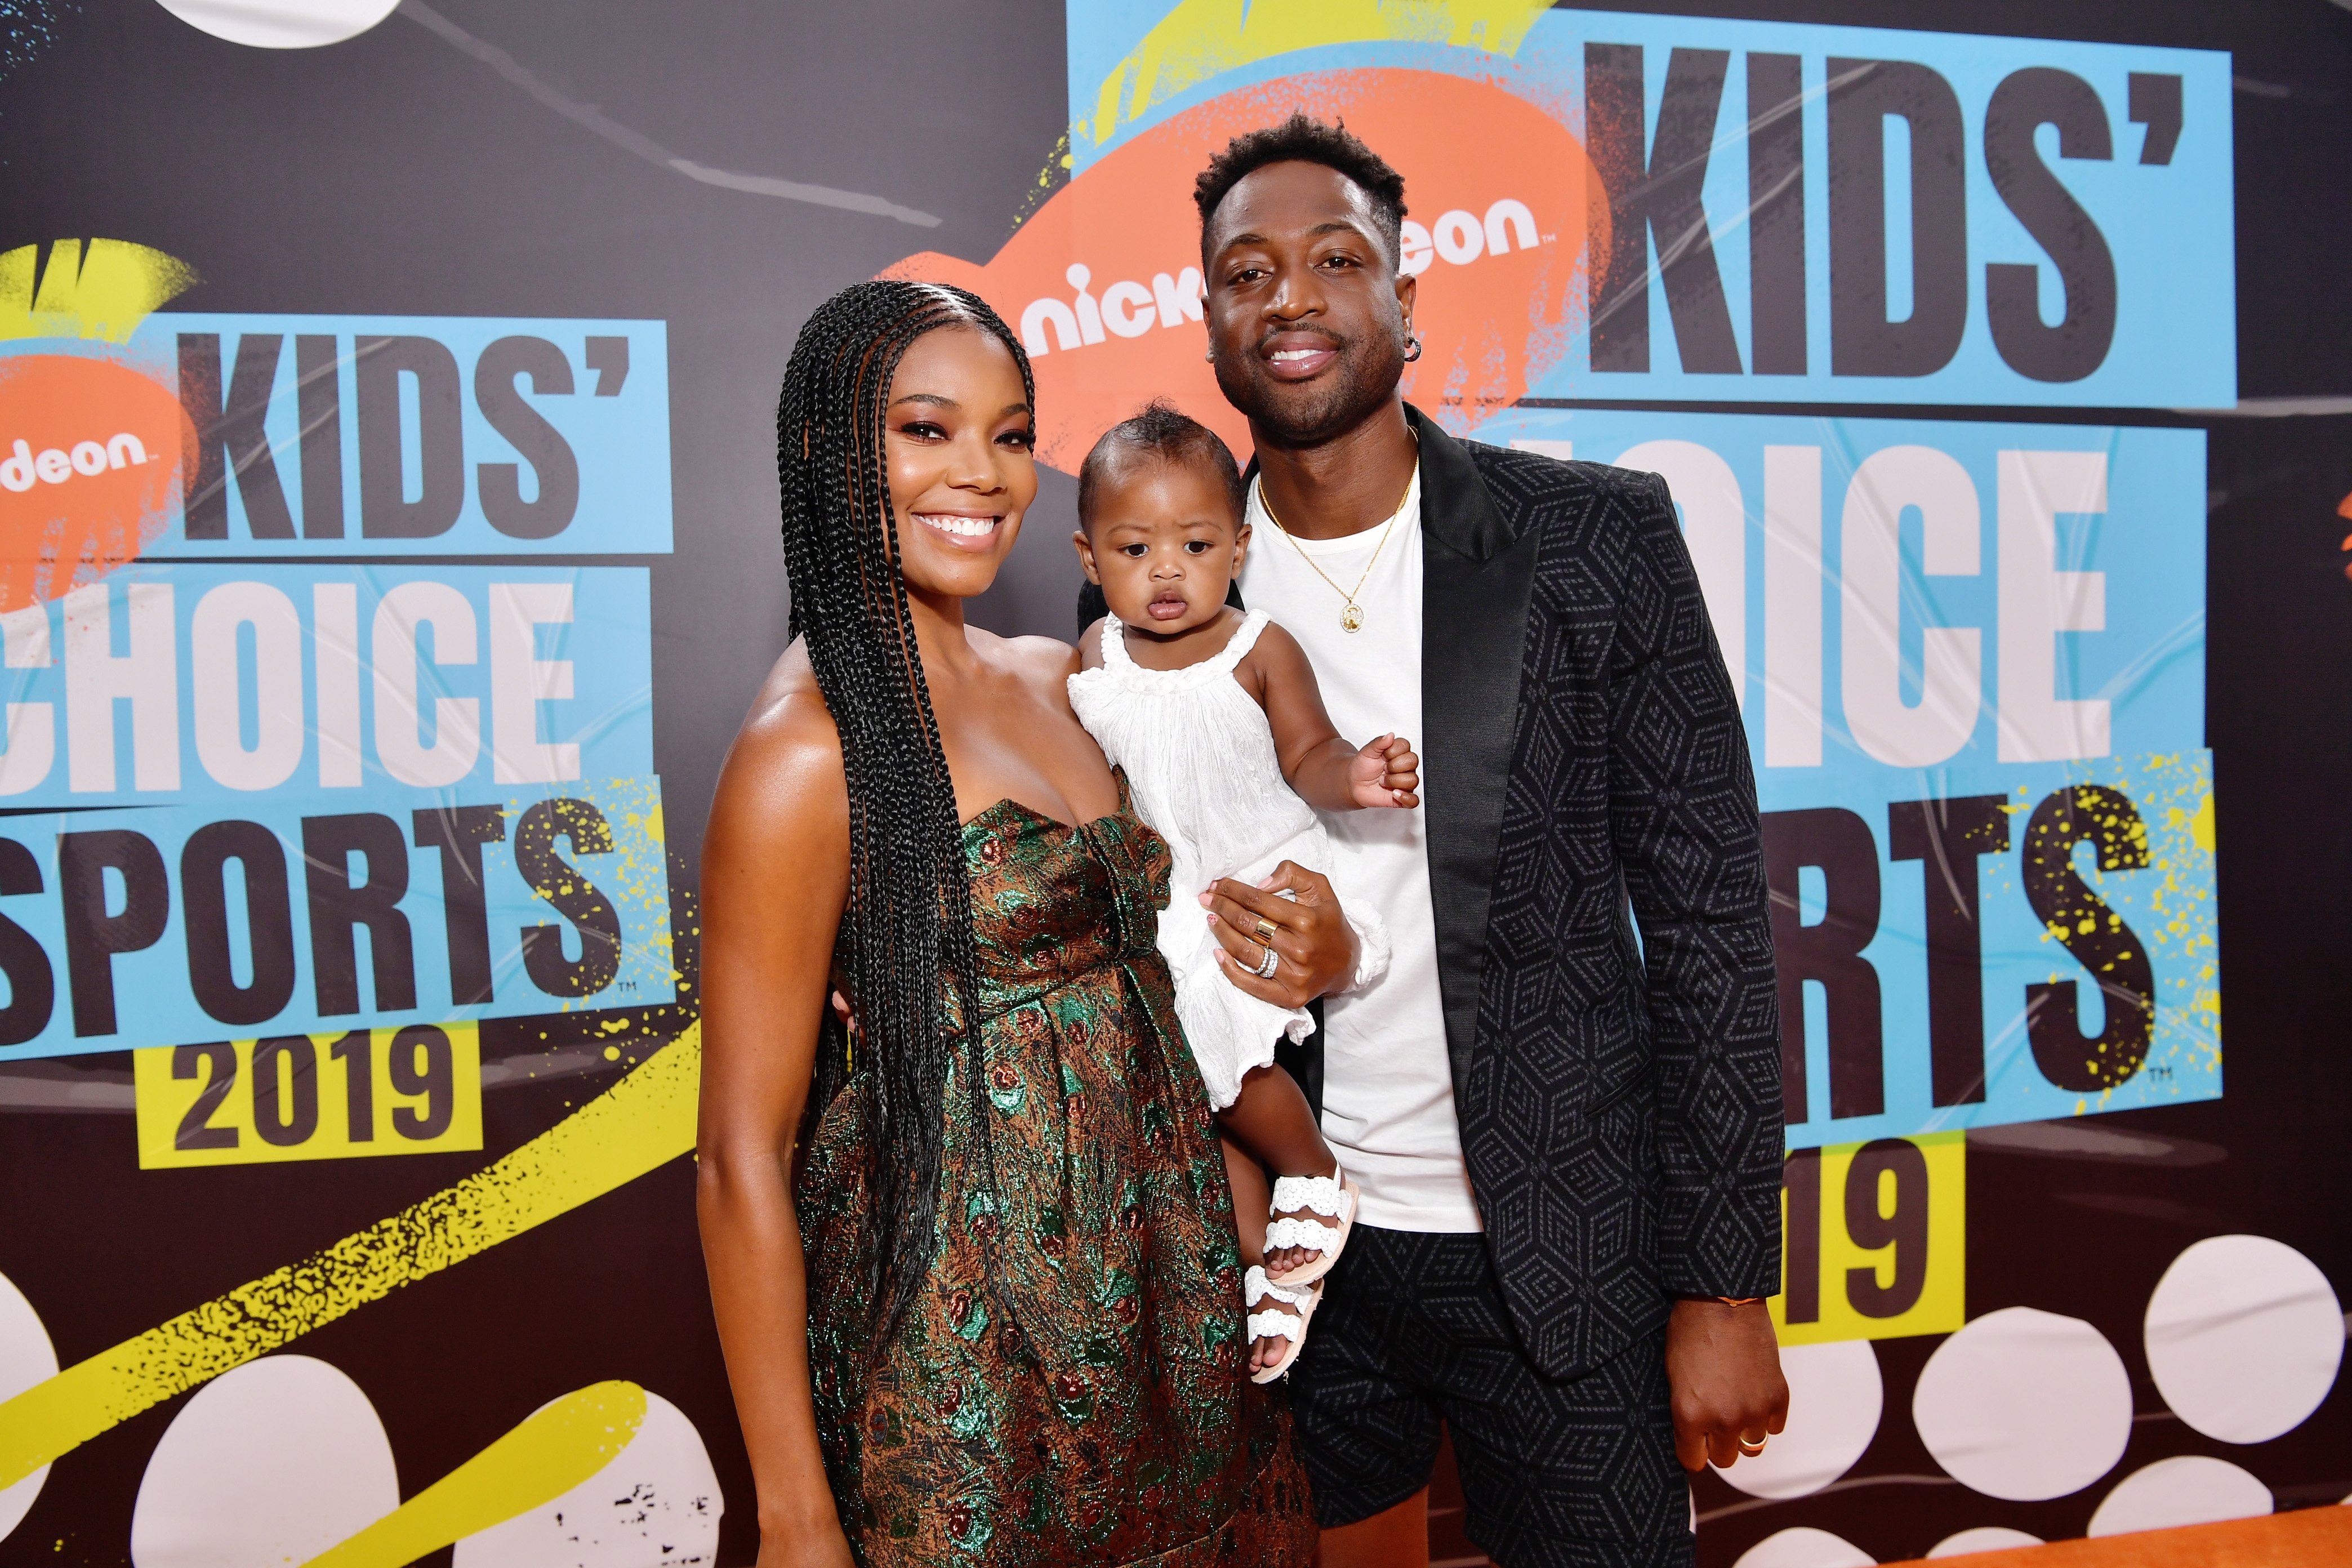 Gabrielle Union, Kaavia James Union Wade, and Dwyane Wade attend Nickelodeon Kids' Choice Sports 2019 at Barker Hangar on July 11, 2019 in Santa Monica, California. | Photo: Getty Images